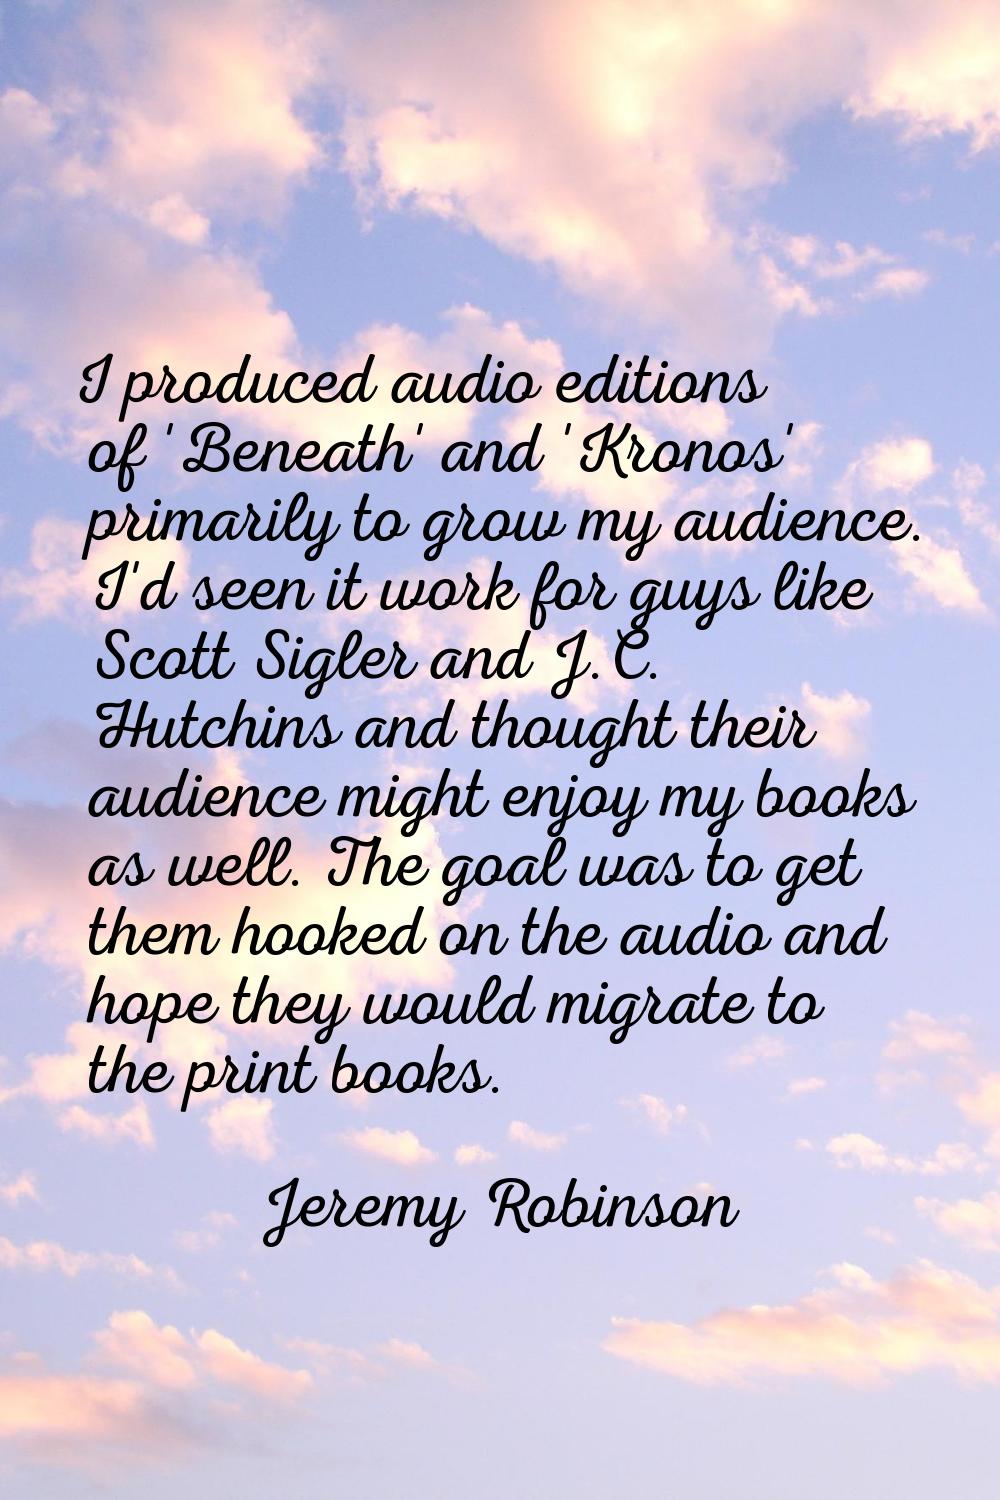 I produced audio editions of 'Beneath' and 'Kronos' primarily to grow my audience. I'd seen it work